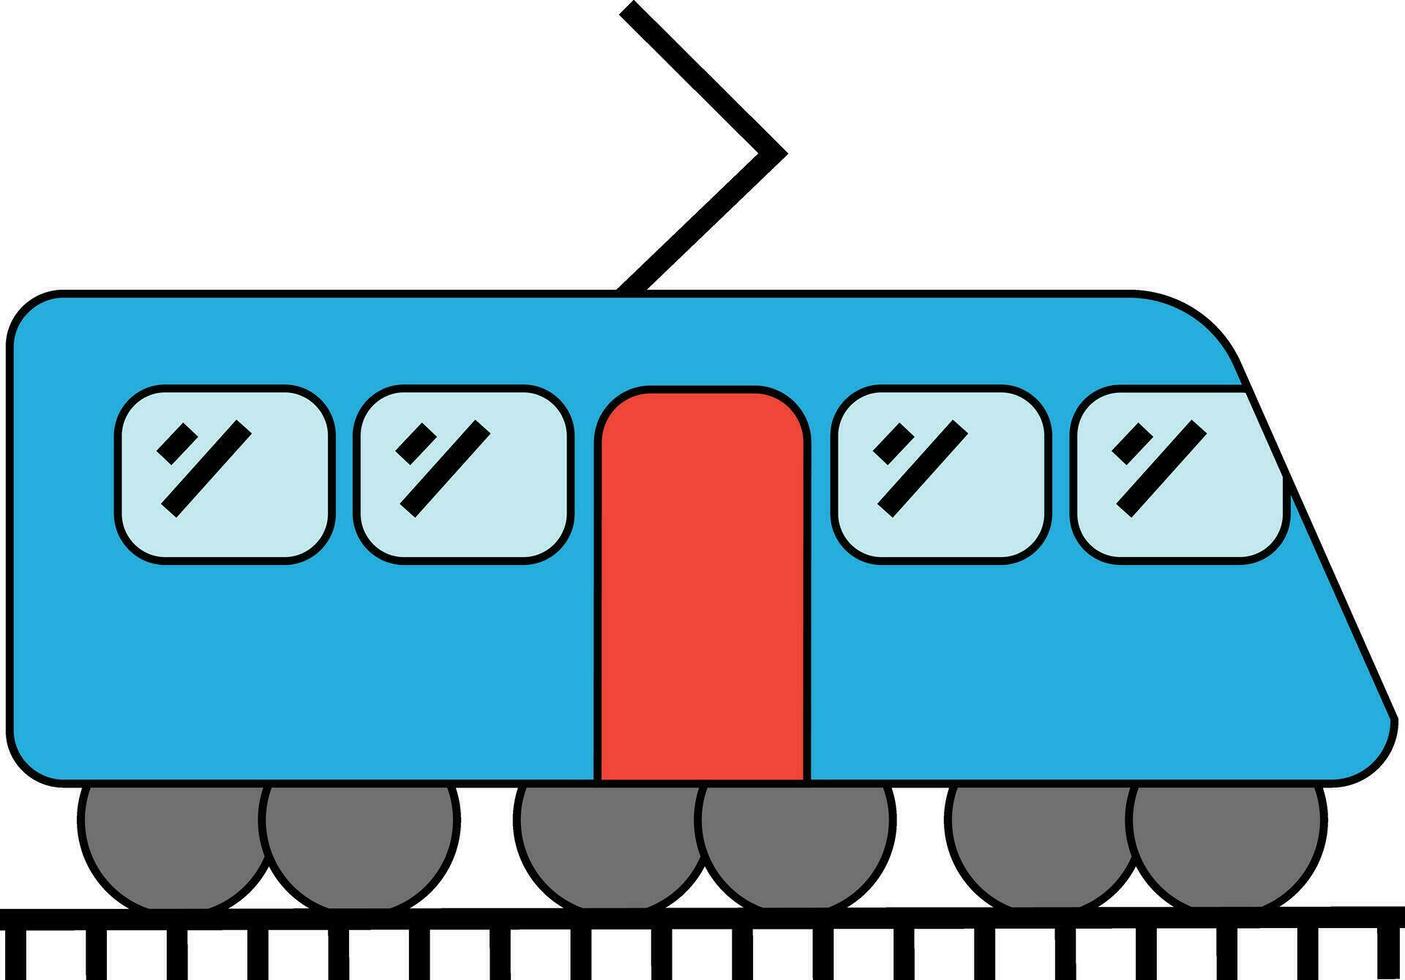 Colourful train in flat style. vector